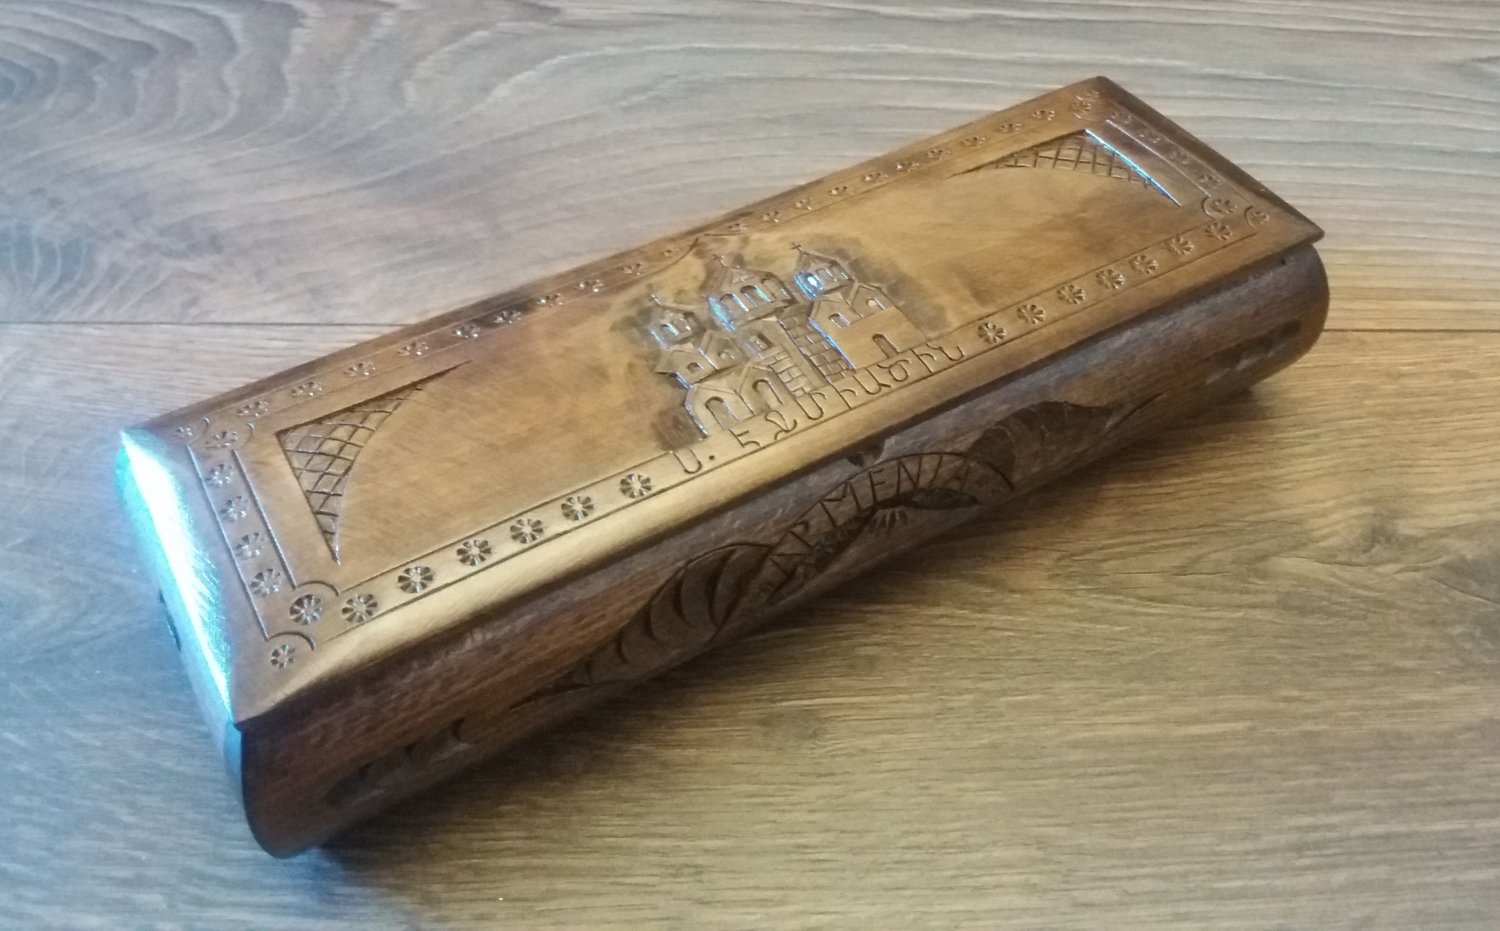 Handcrafted Long Armenian Wooden Box with Etchmiadzin Cathedral, Mount Ararat and the Eternity Sign